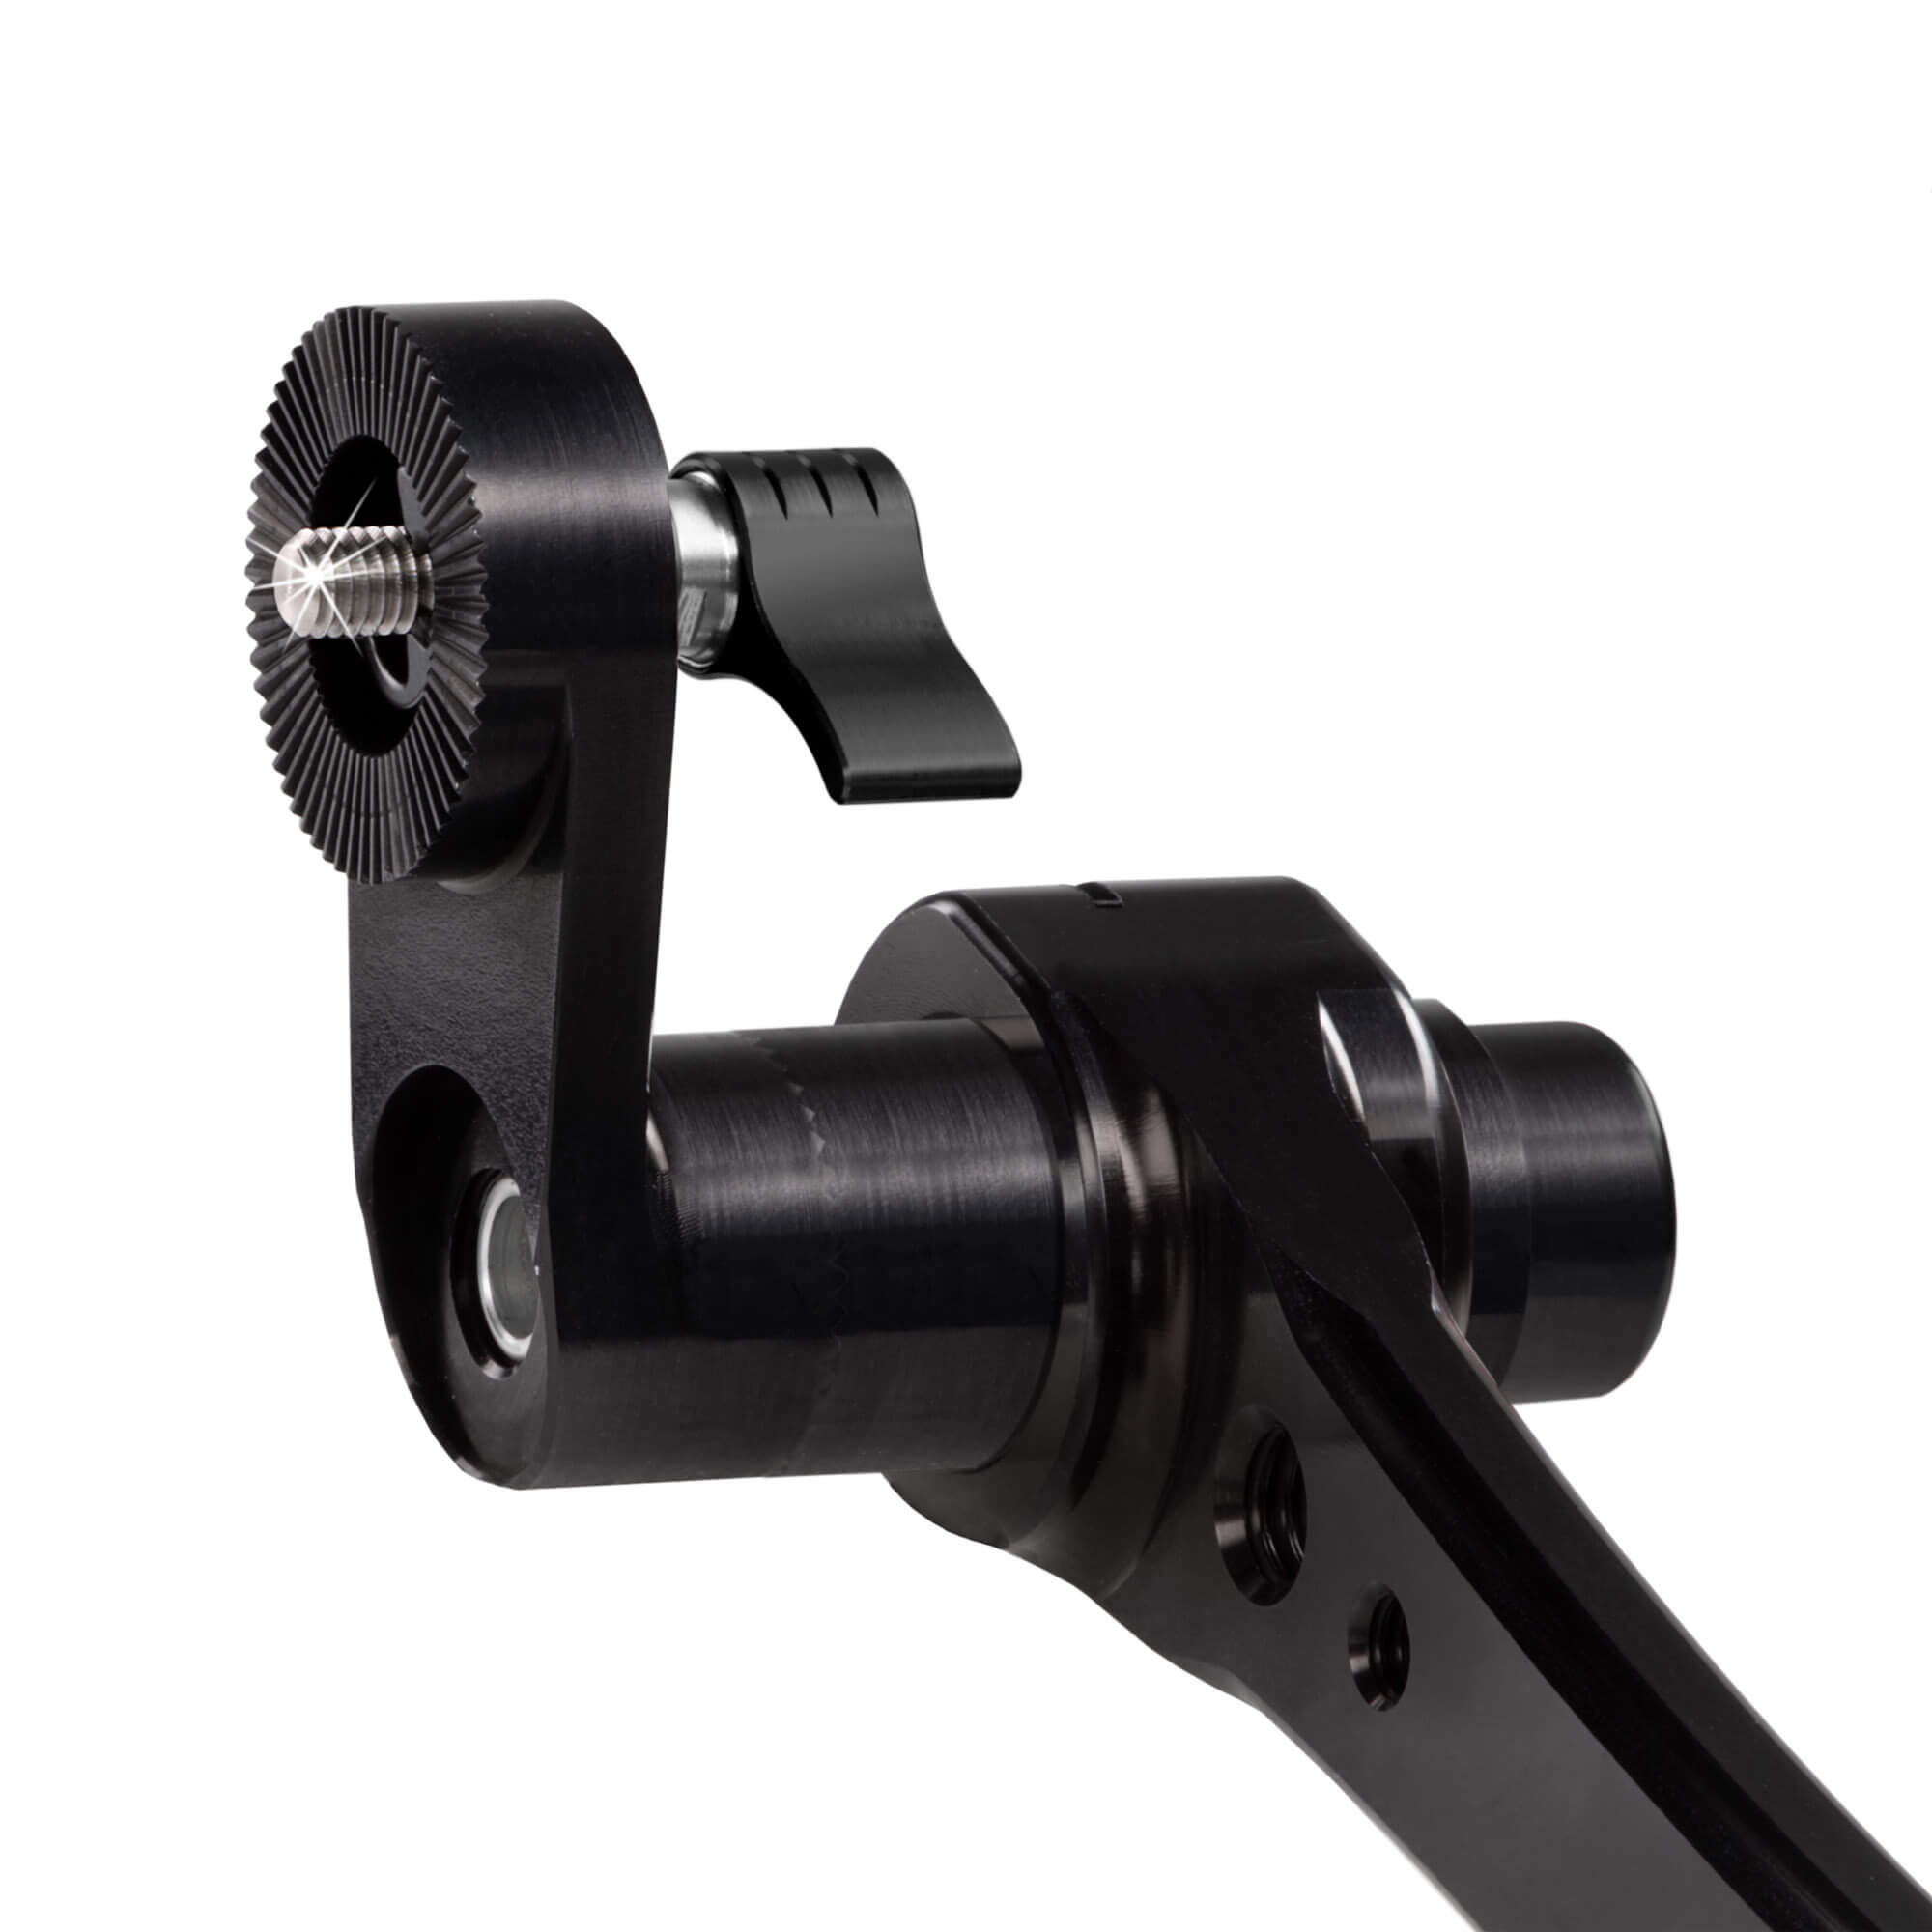 Compact REVOLT shoulder baseplate (BP20) with HAND15 shadow - SHAPE